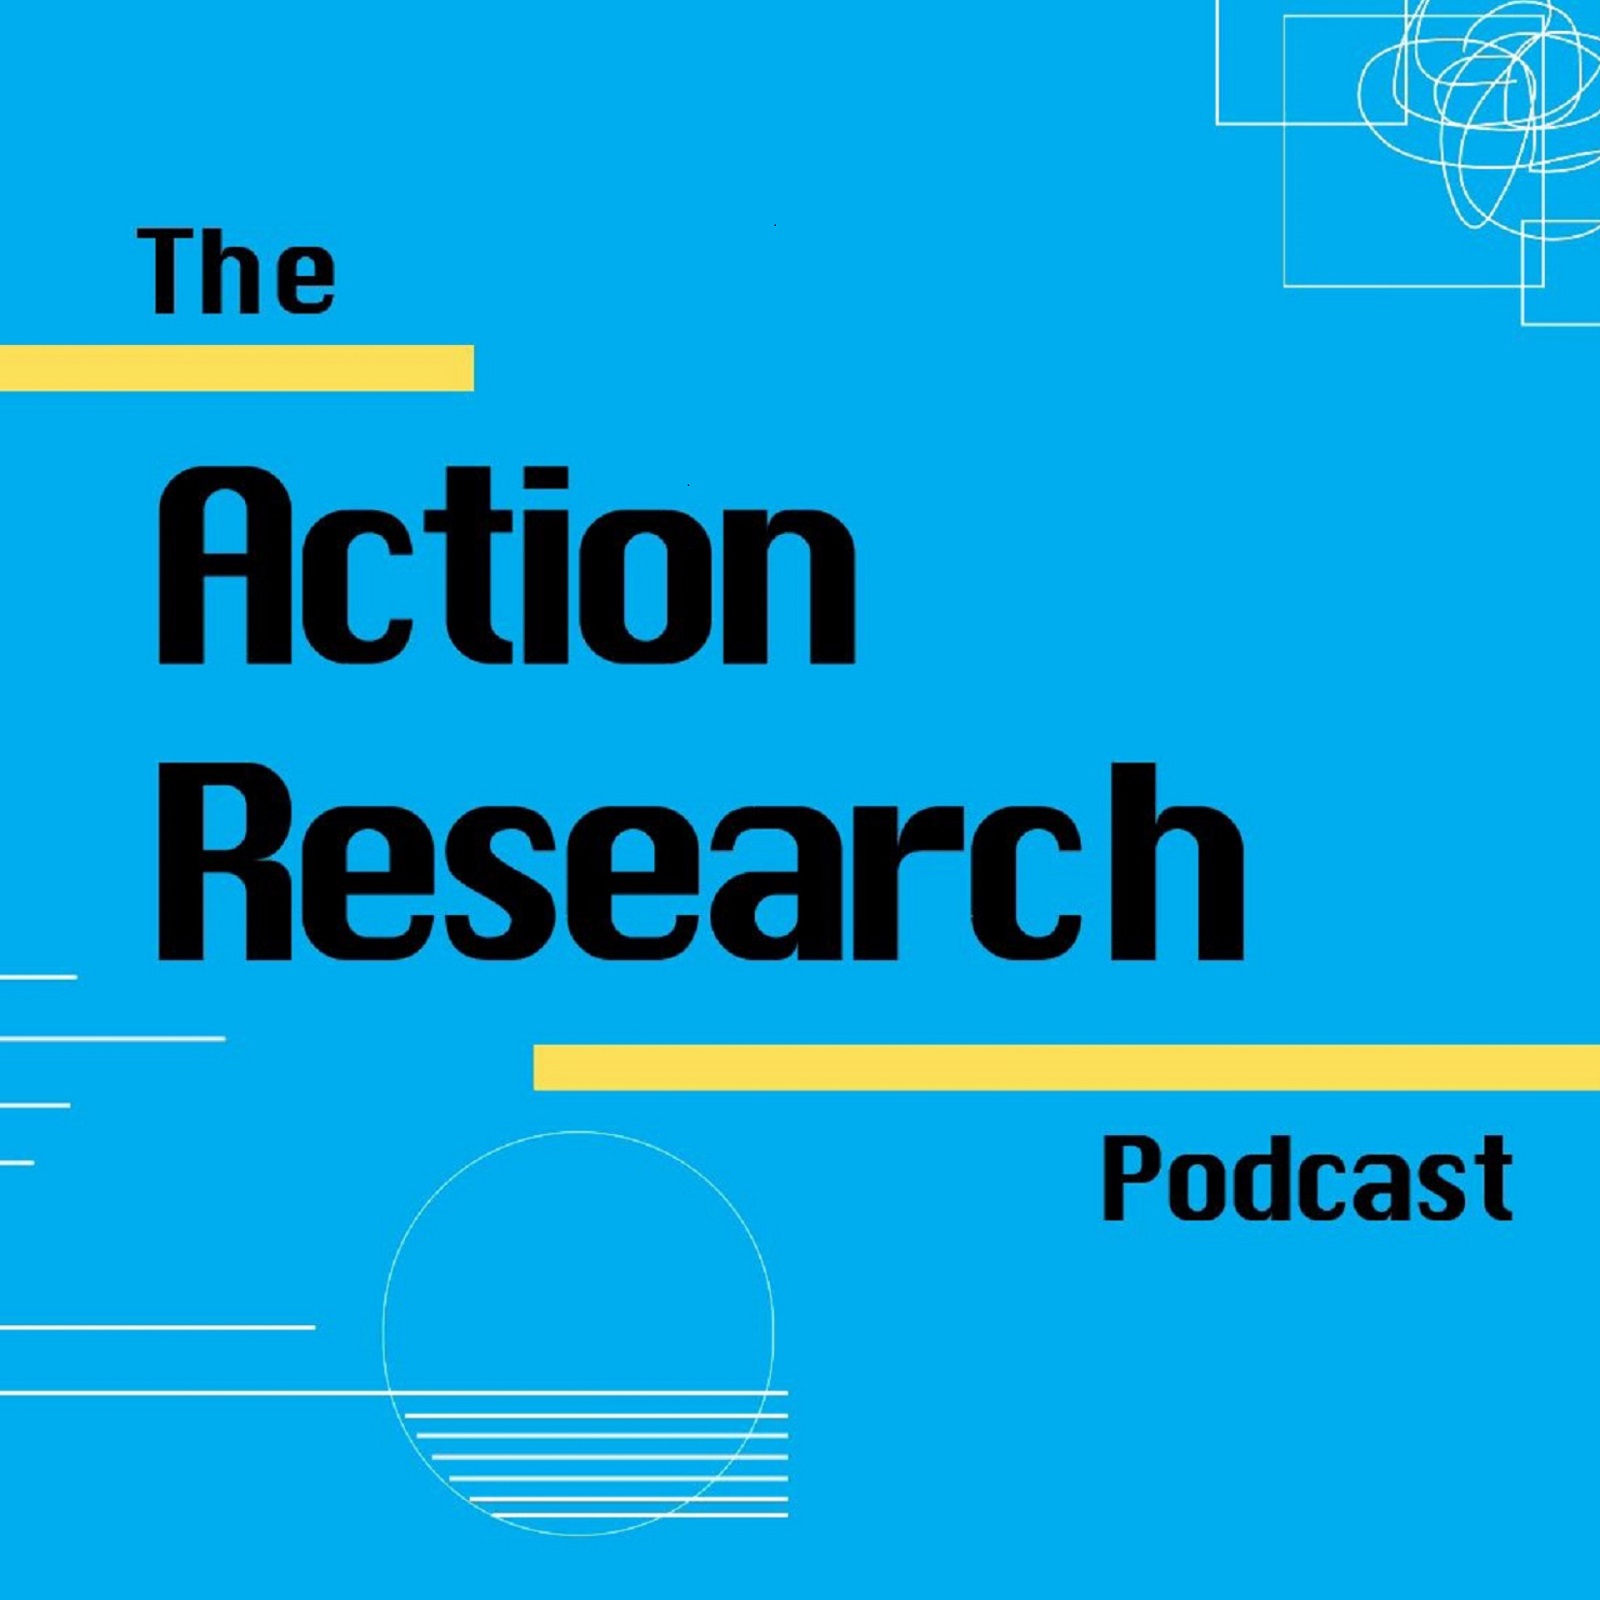 Artwork for podcast The Action Research Podcast